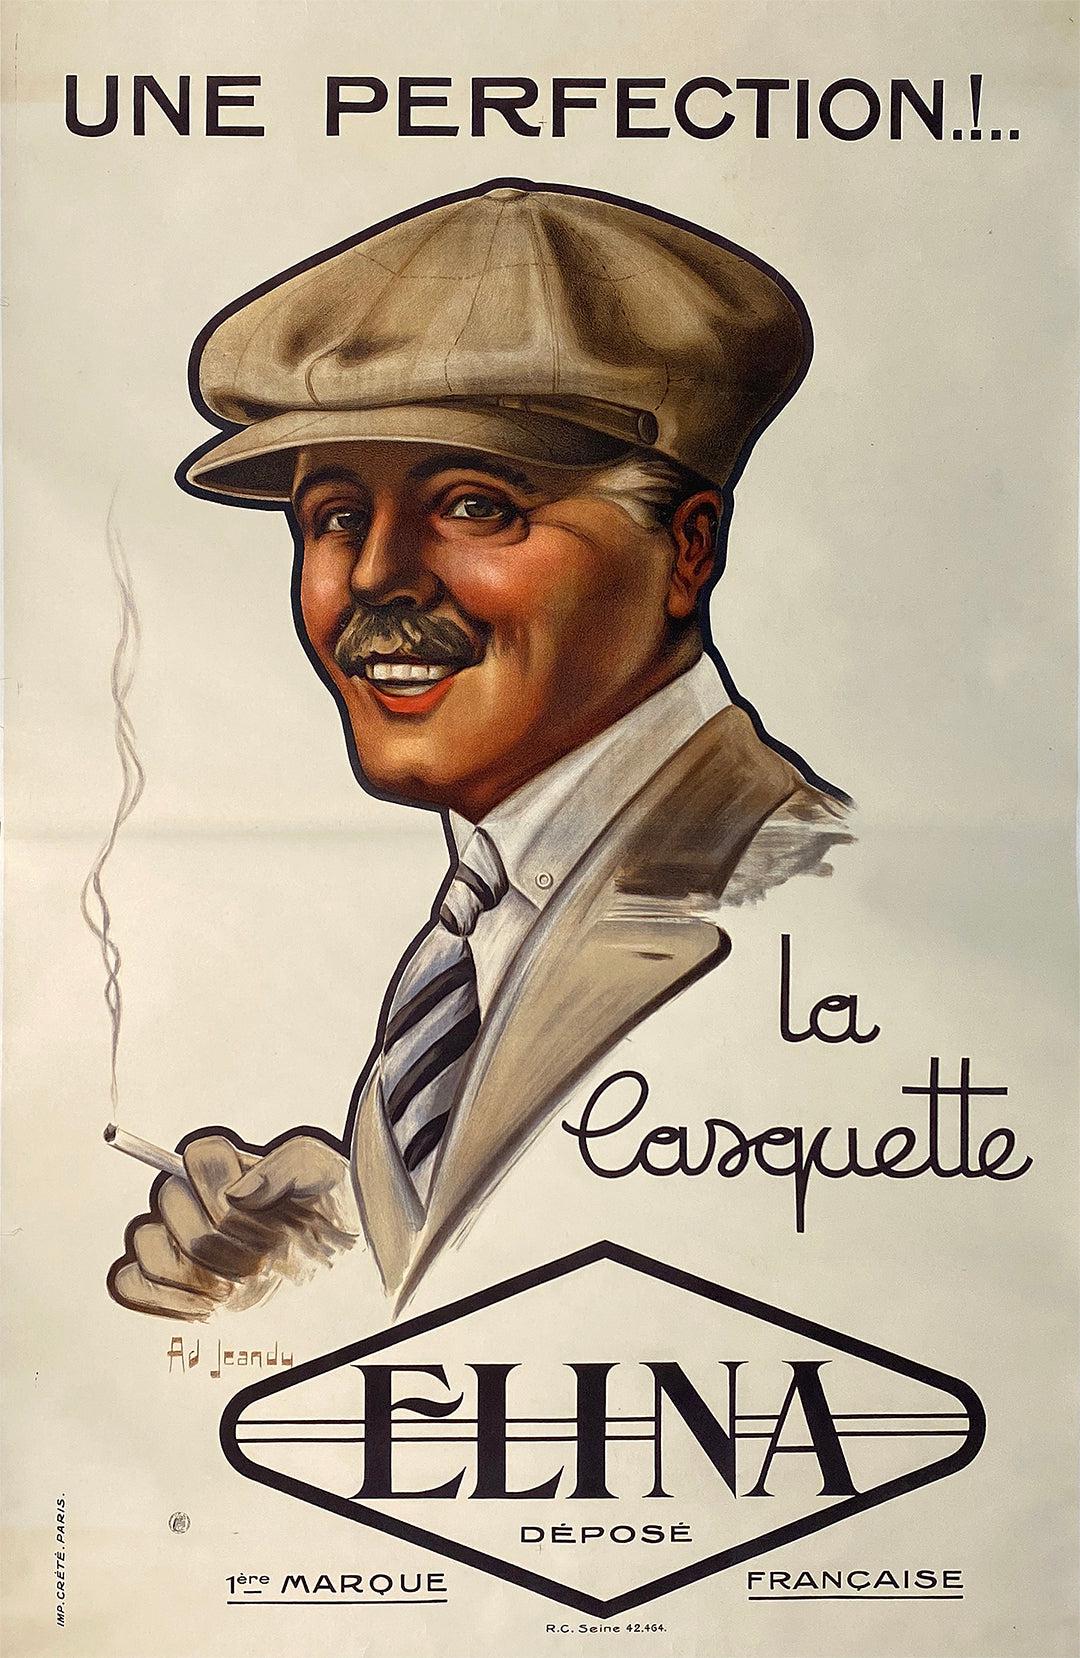 Elina la Casquette French Men's Hat Poster by Jeandy c1915 Oversize